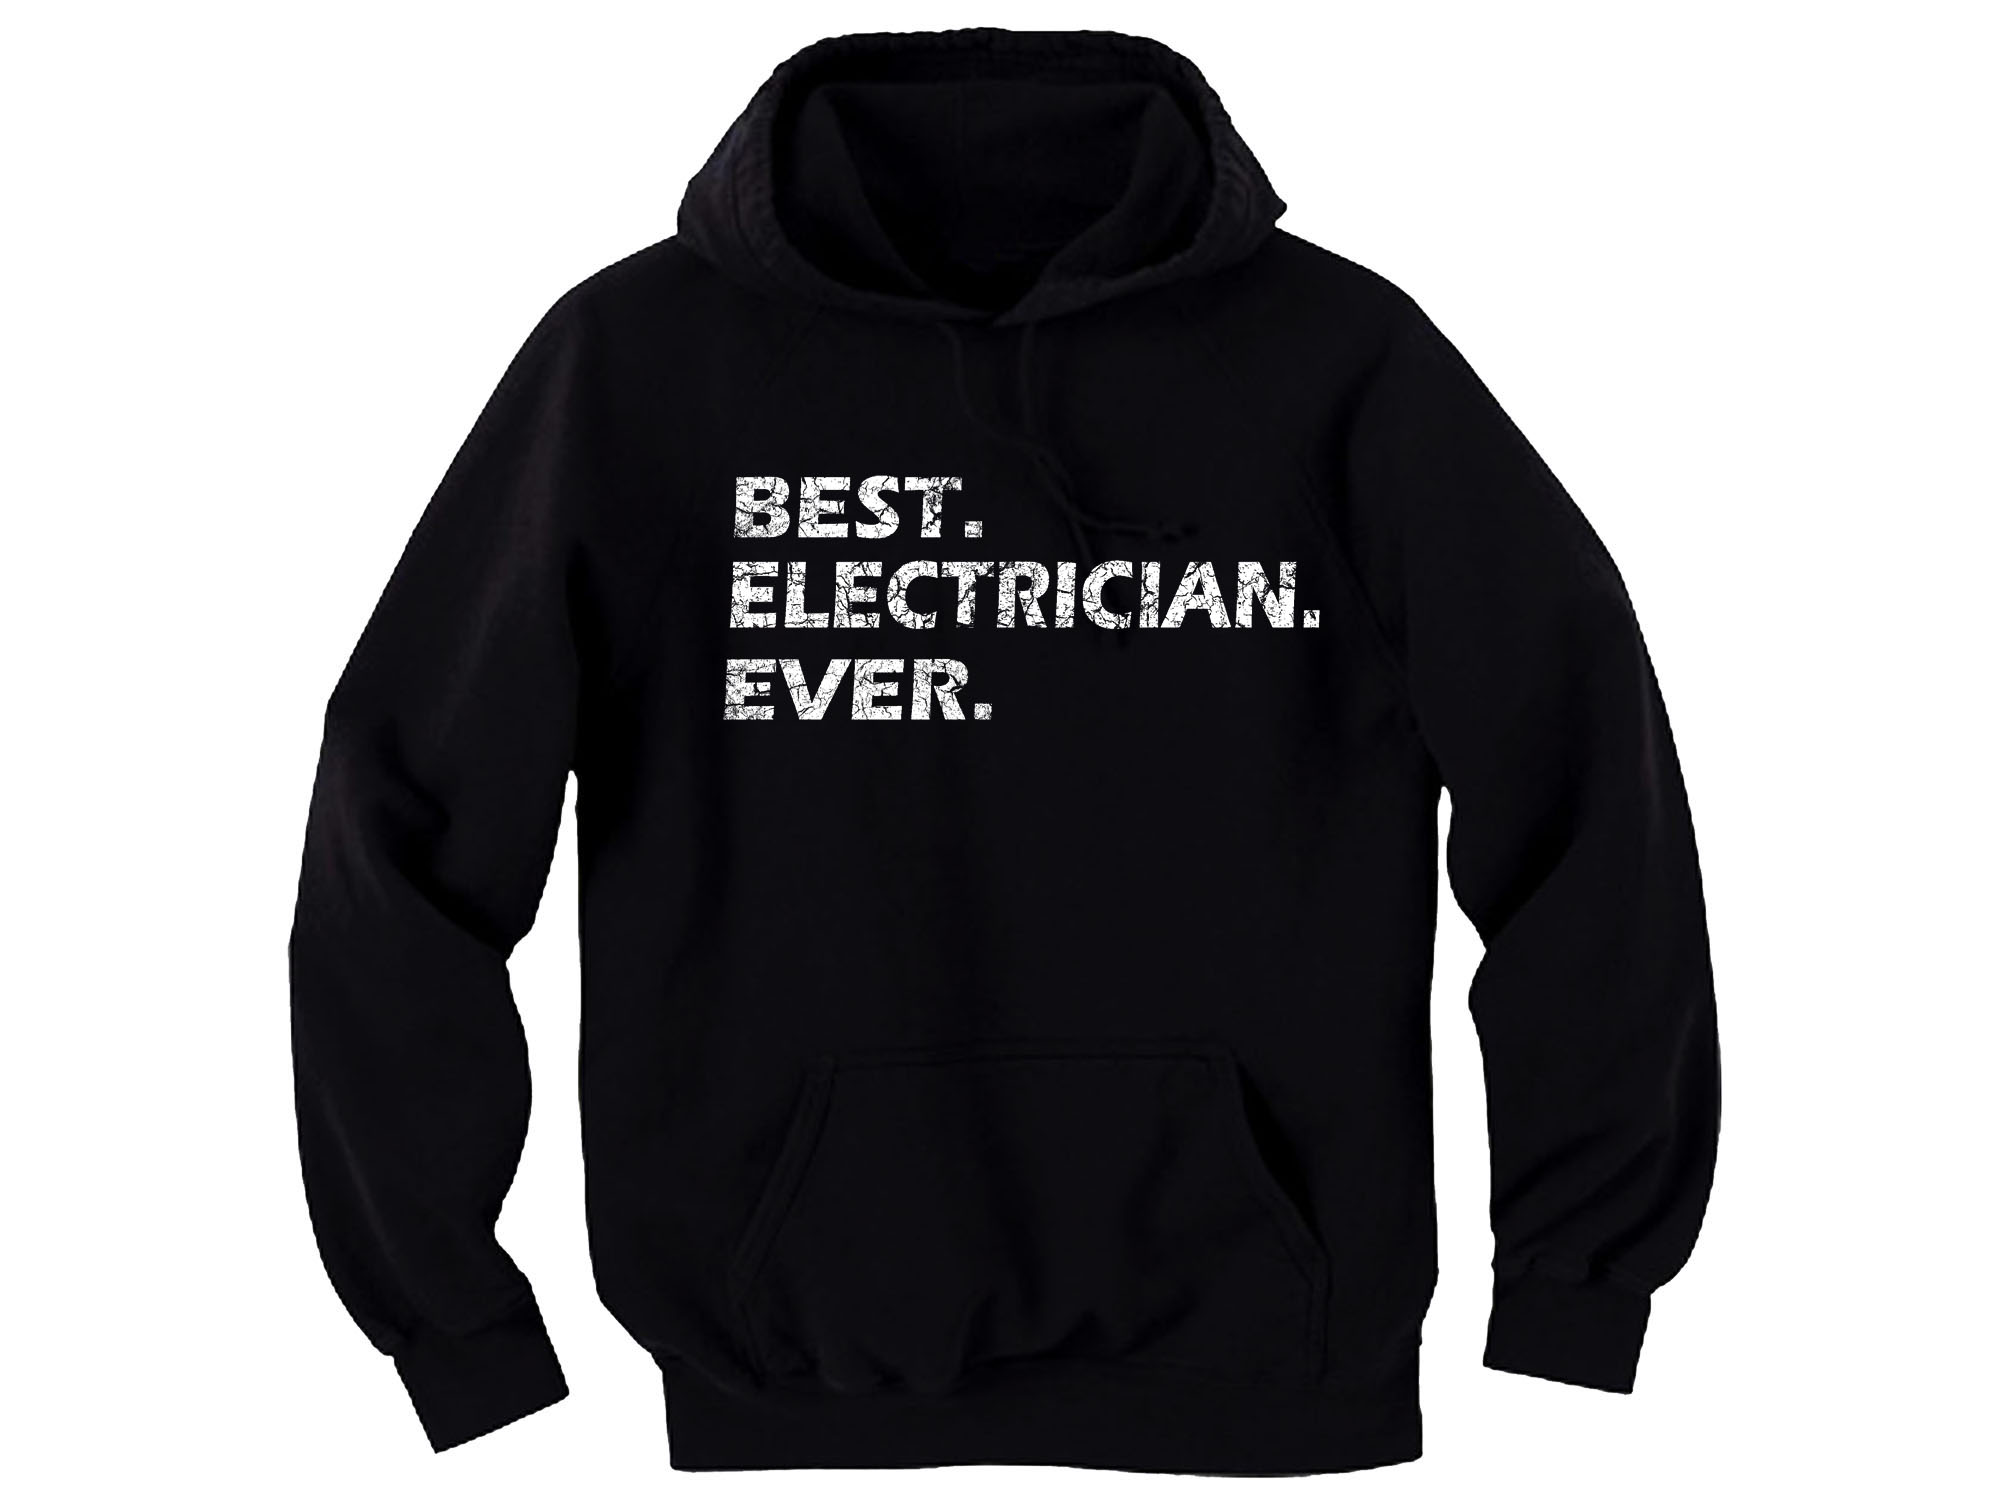 Best electrician ever distressed print hoodie coworker,father,friend gift